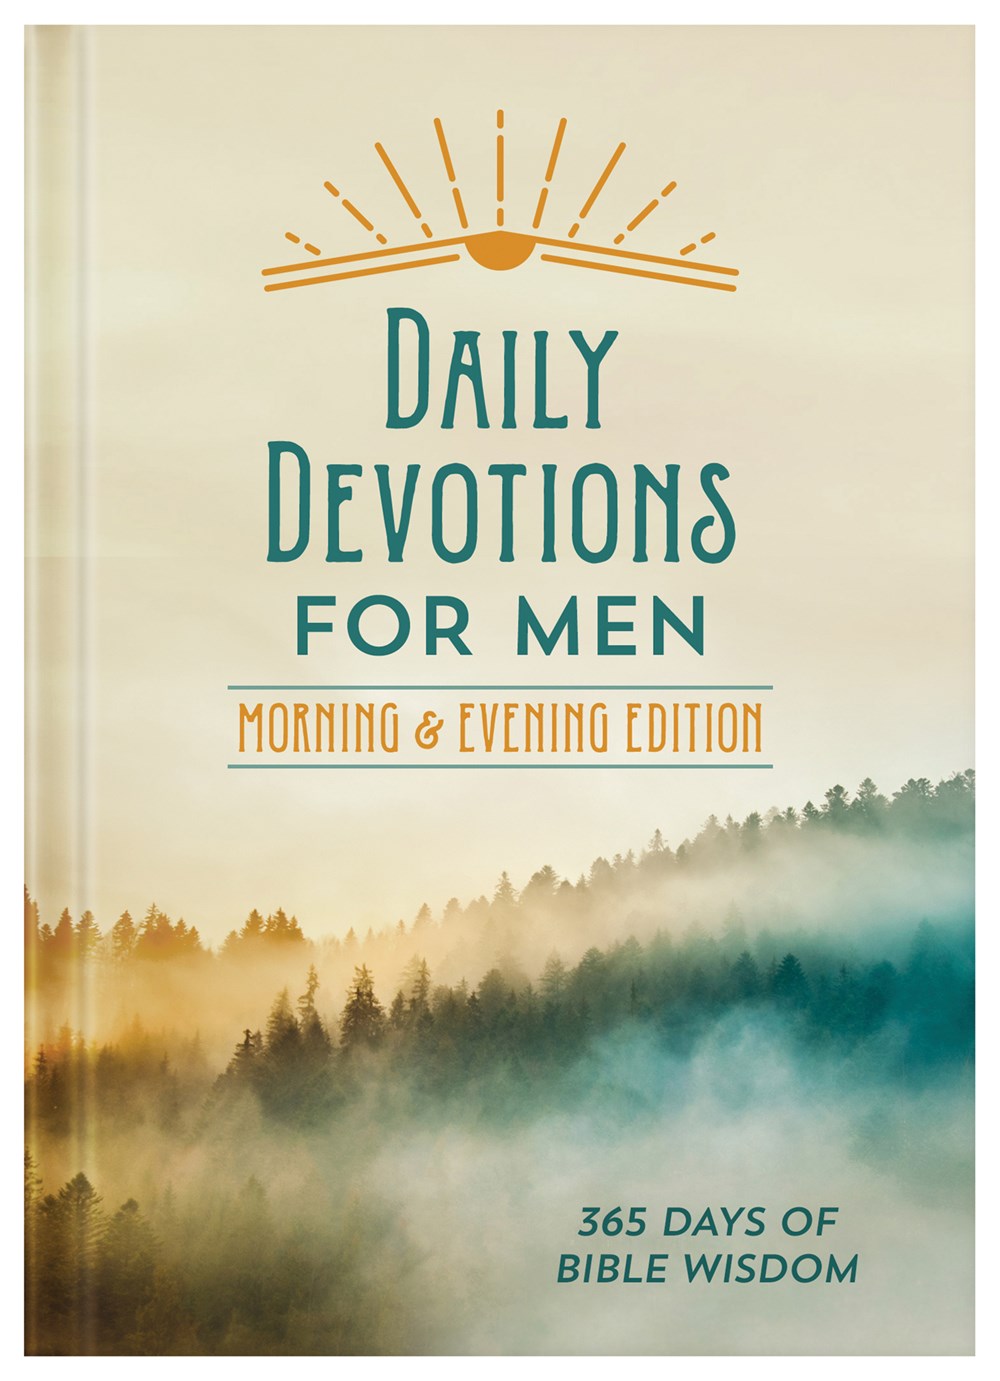 Daily Devotions for Men Morning & Evening Edition - The Christian Gift Company